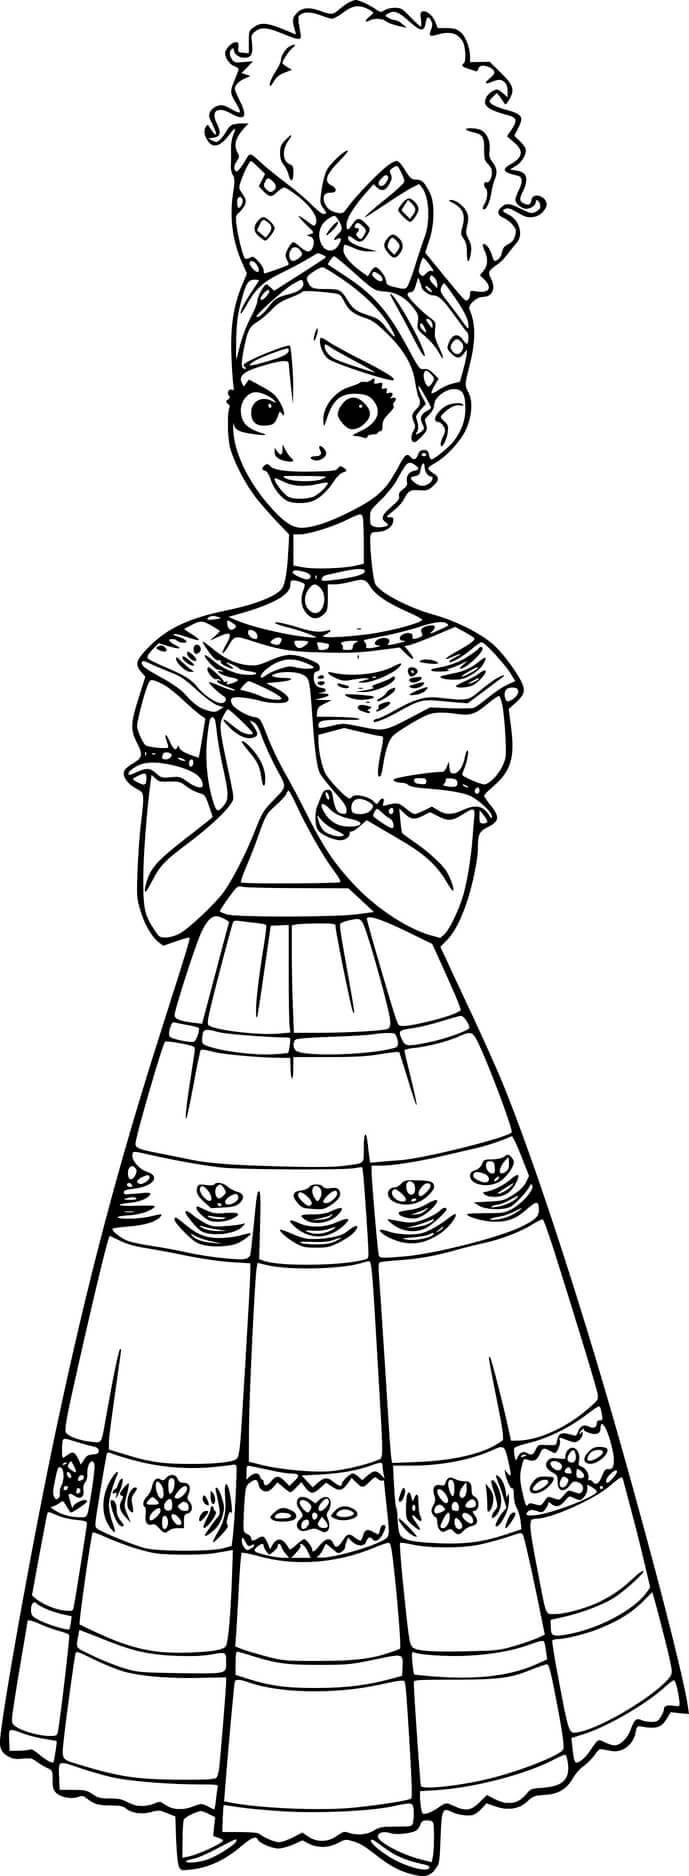 Encanto dolores madrigal coloring pages